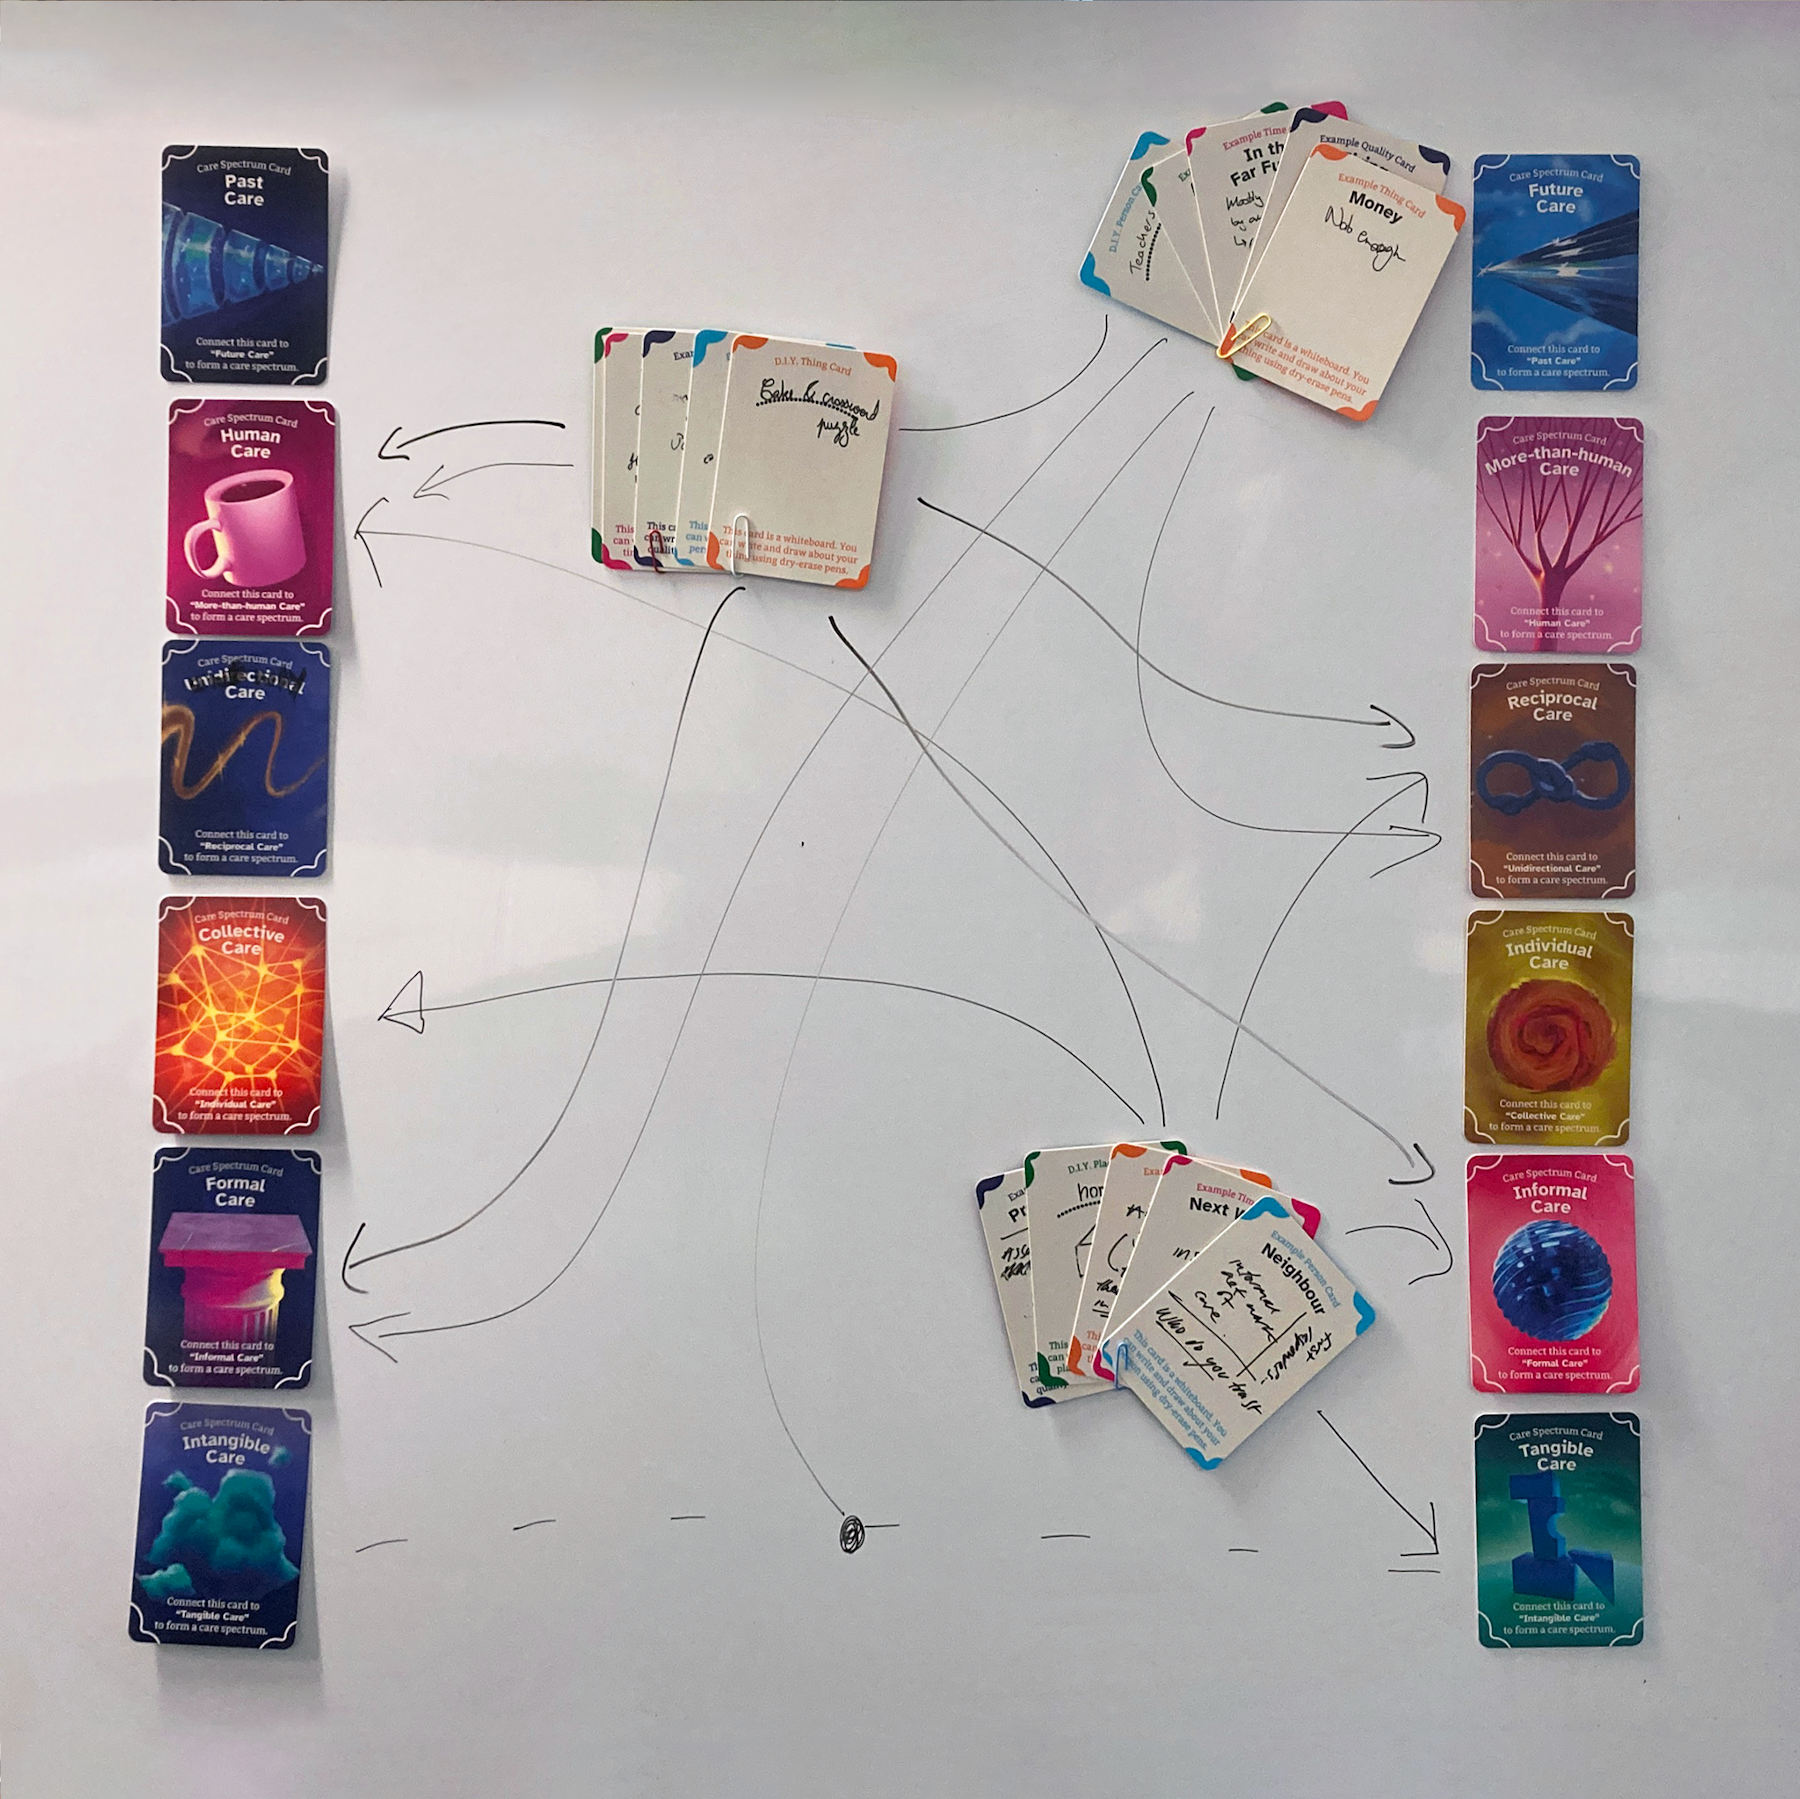 Bundles of cards mapped in relation to the twelve care spectrum
cards.